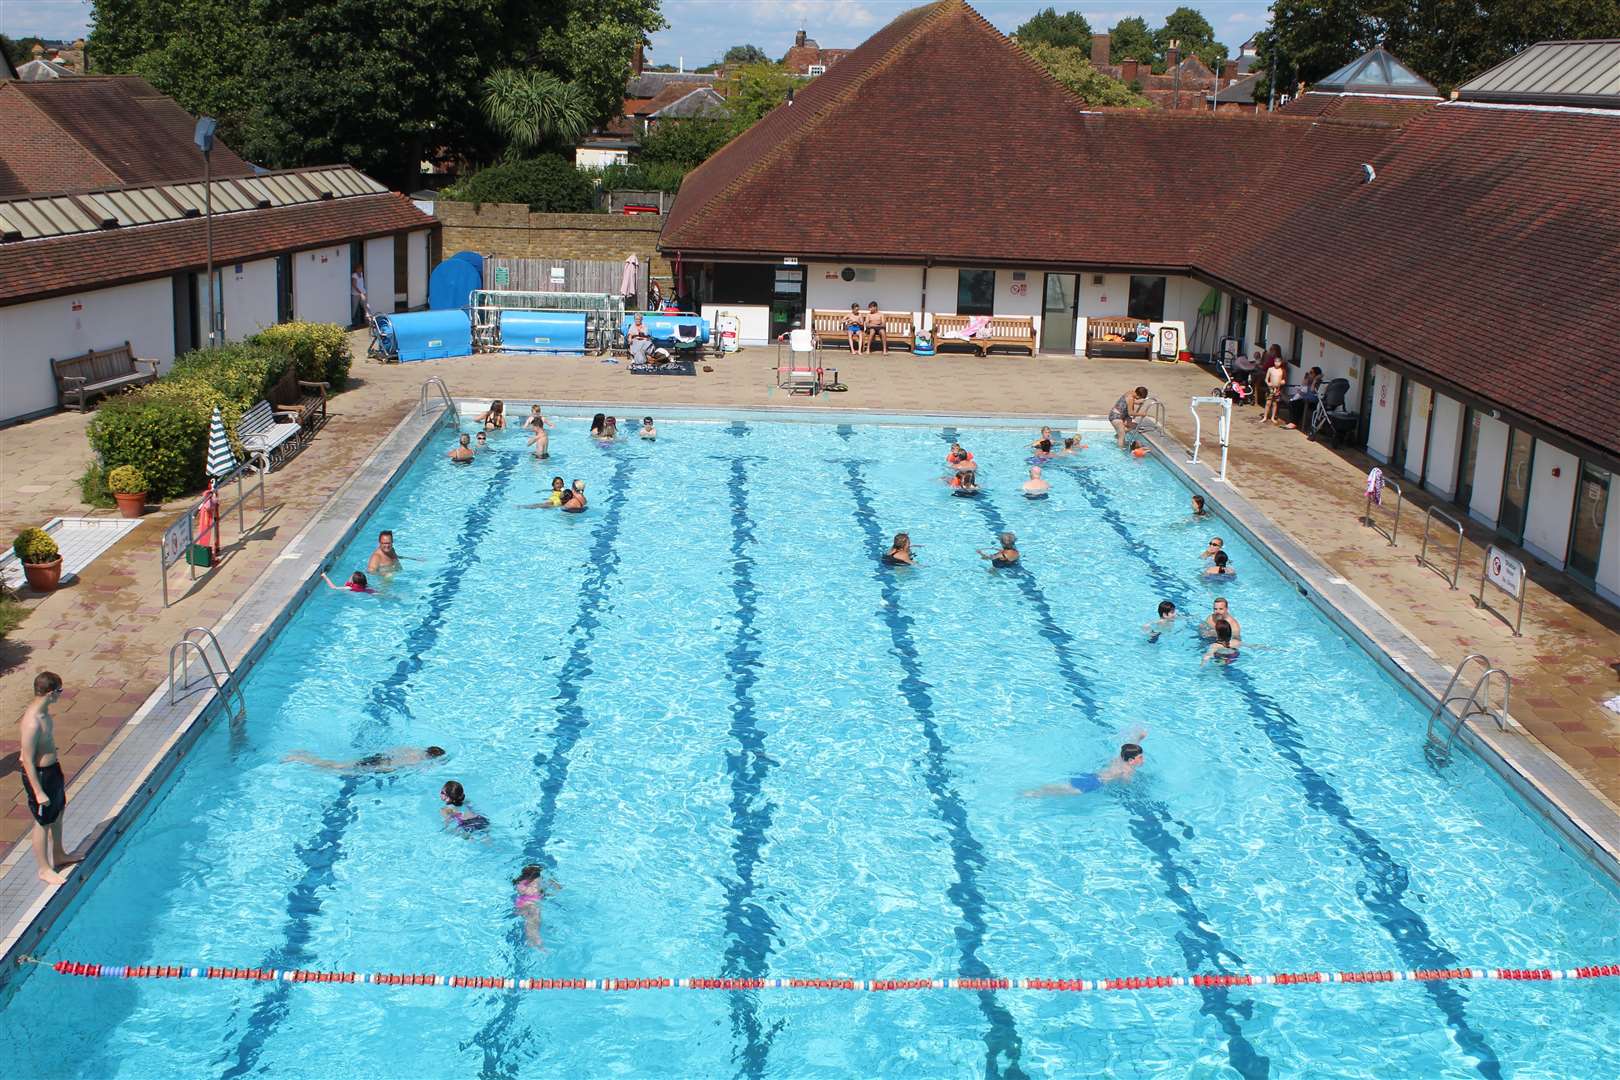 The main outdoor pool is now open all year round. Picture: Poppy Boorman/Faversham Pools